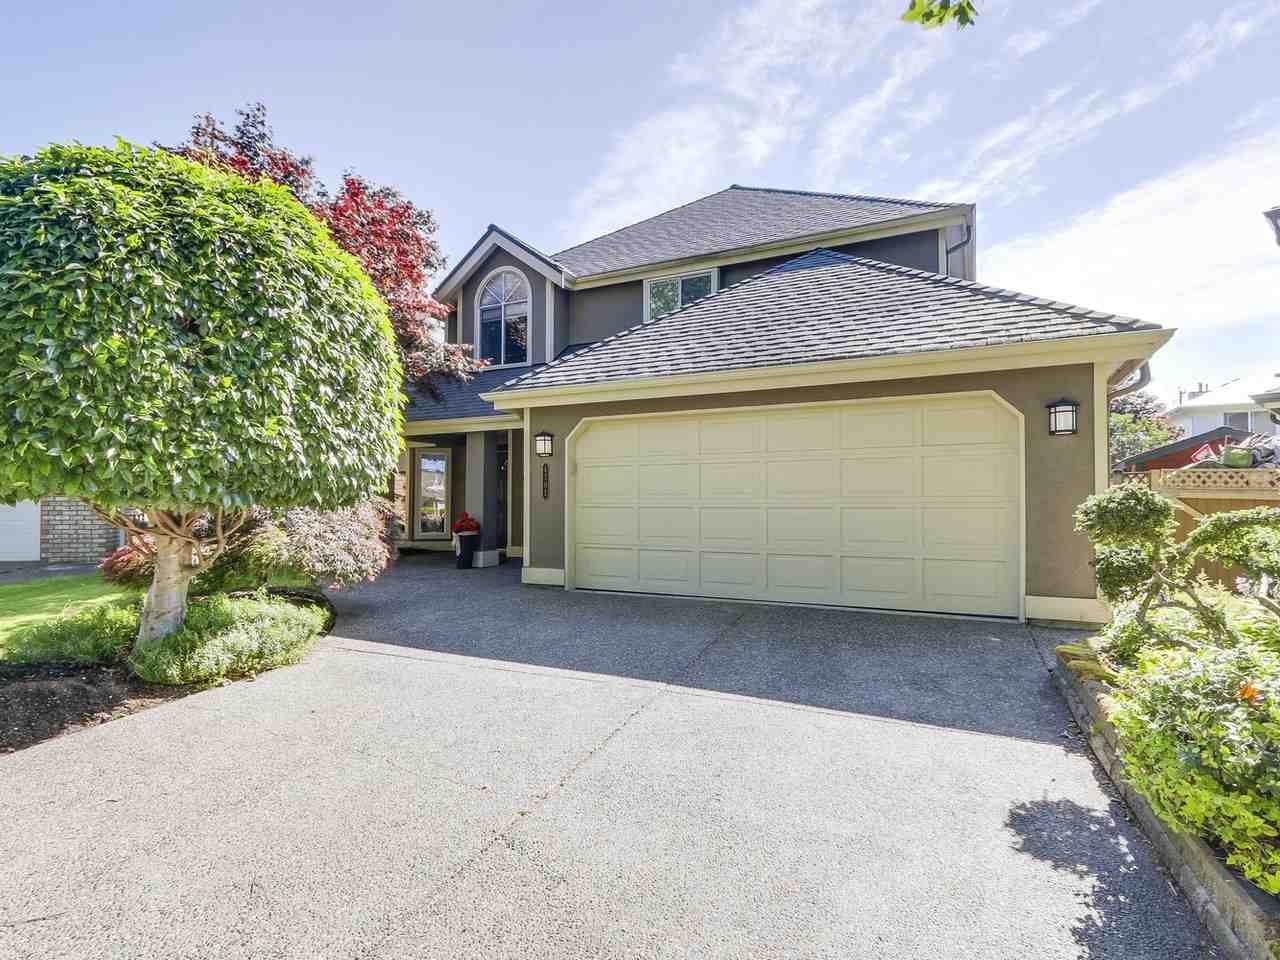 Main Photo: 4702 63 STREET in Delta: Holly House for sale (Ladner)  : MLS®# R2189293